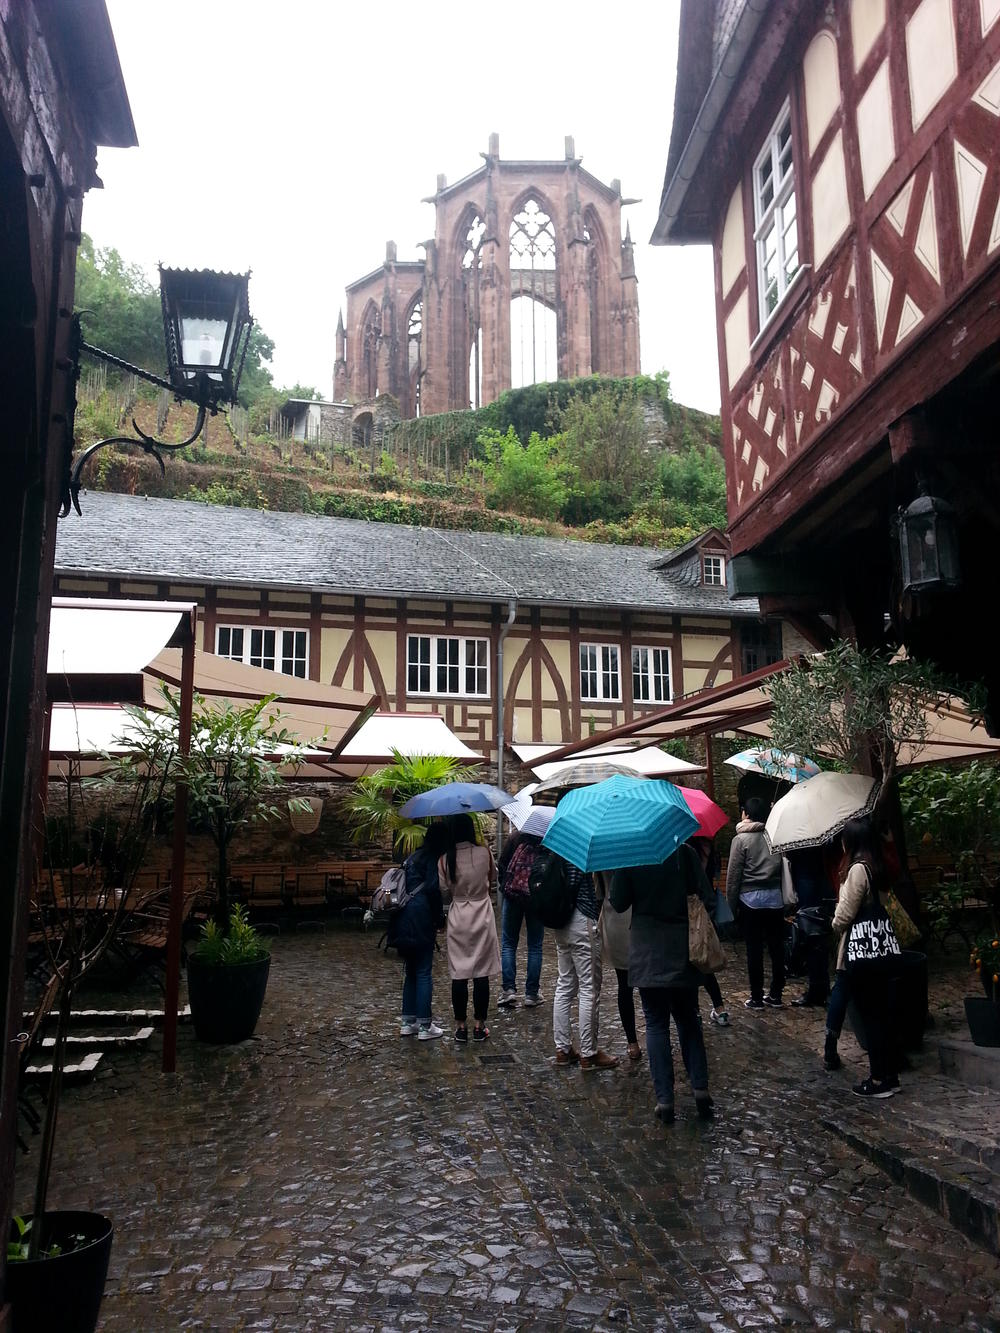 Bad wheather and beautiful views in Bacharach.